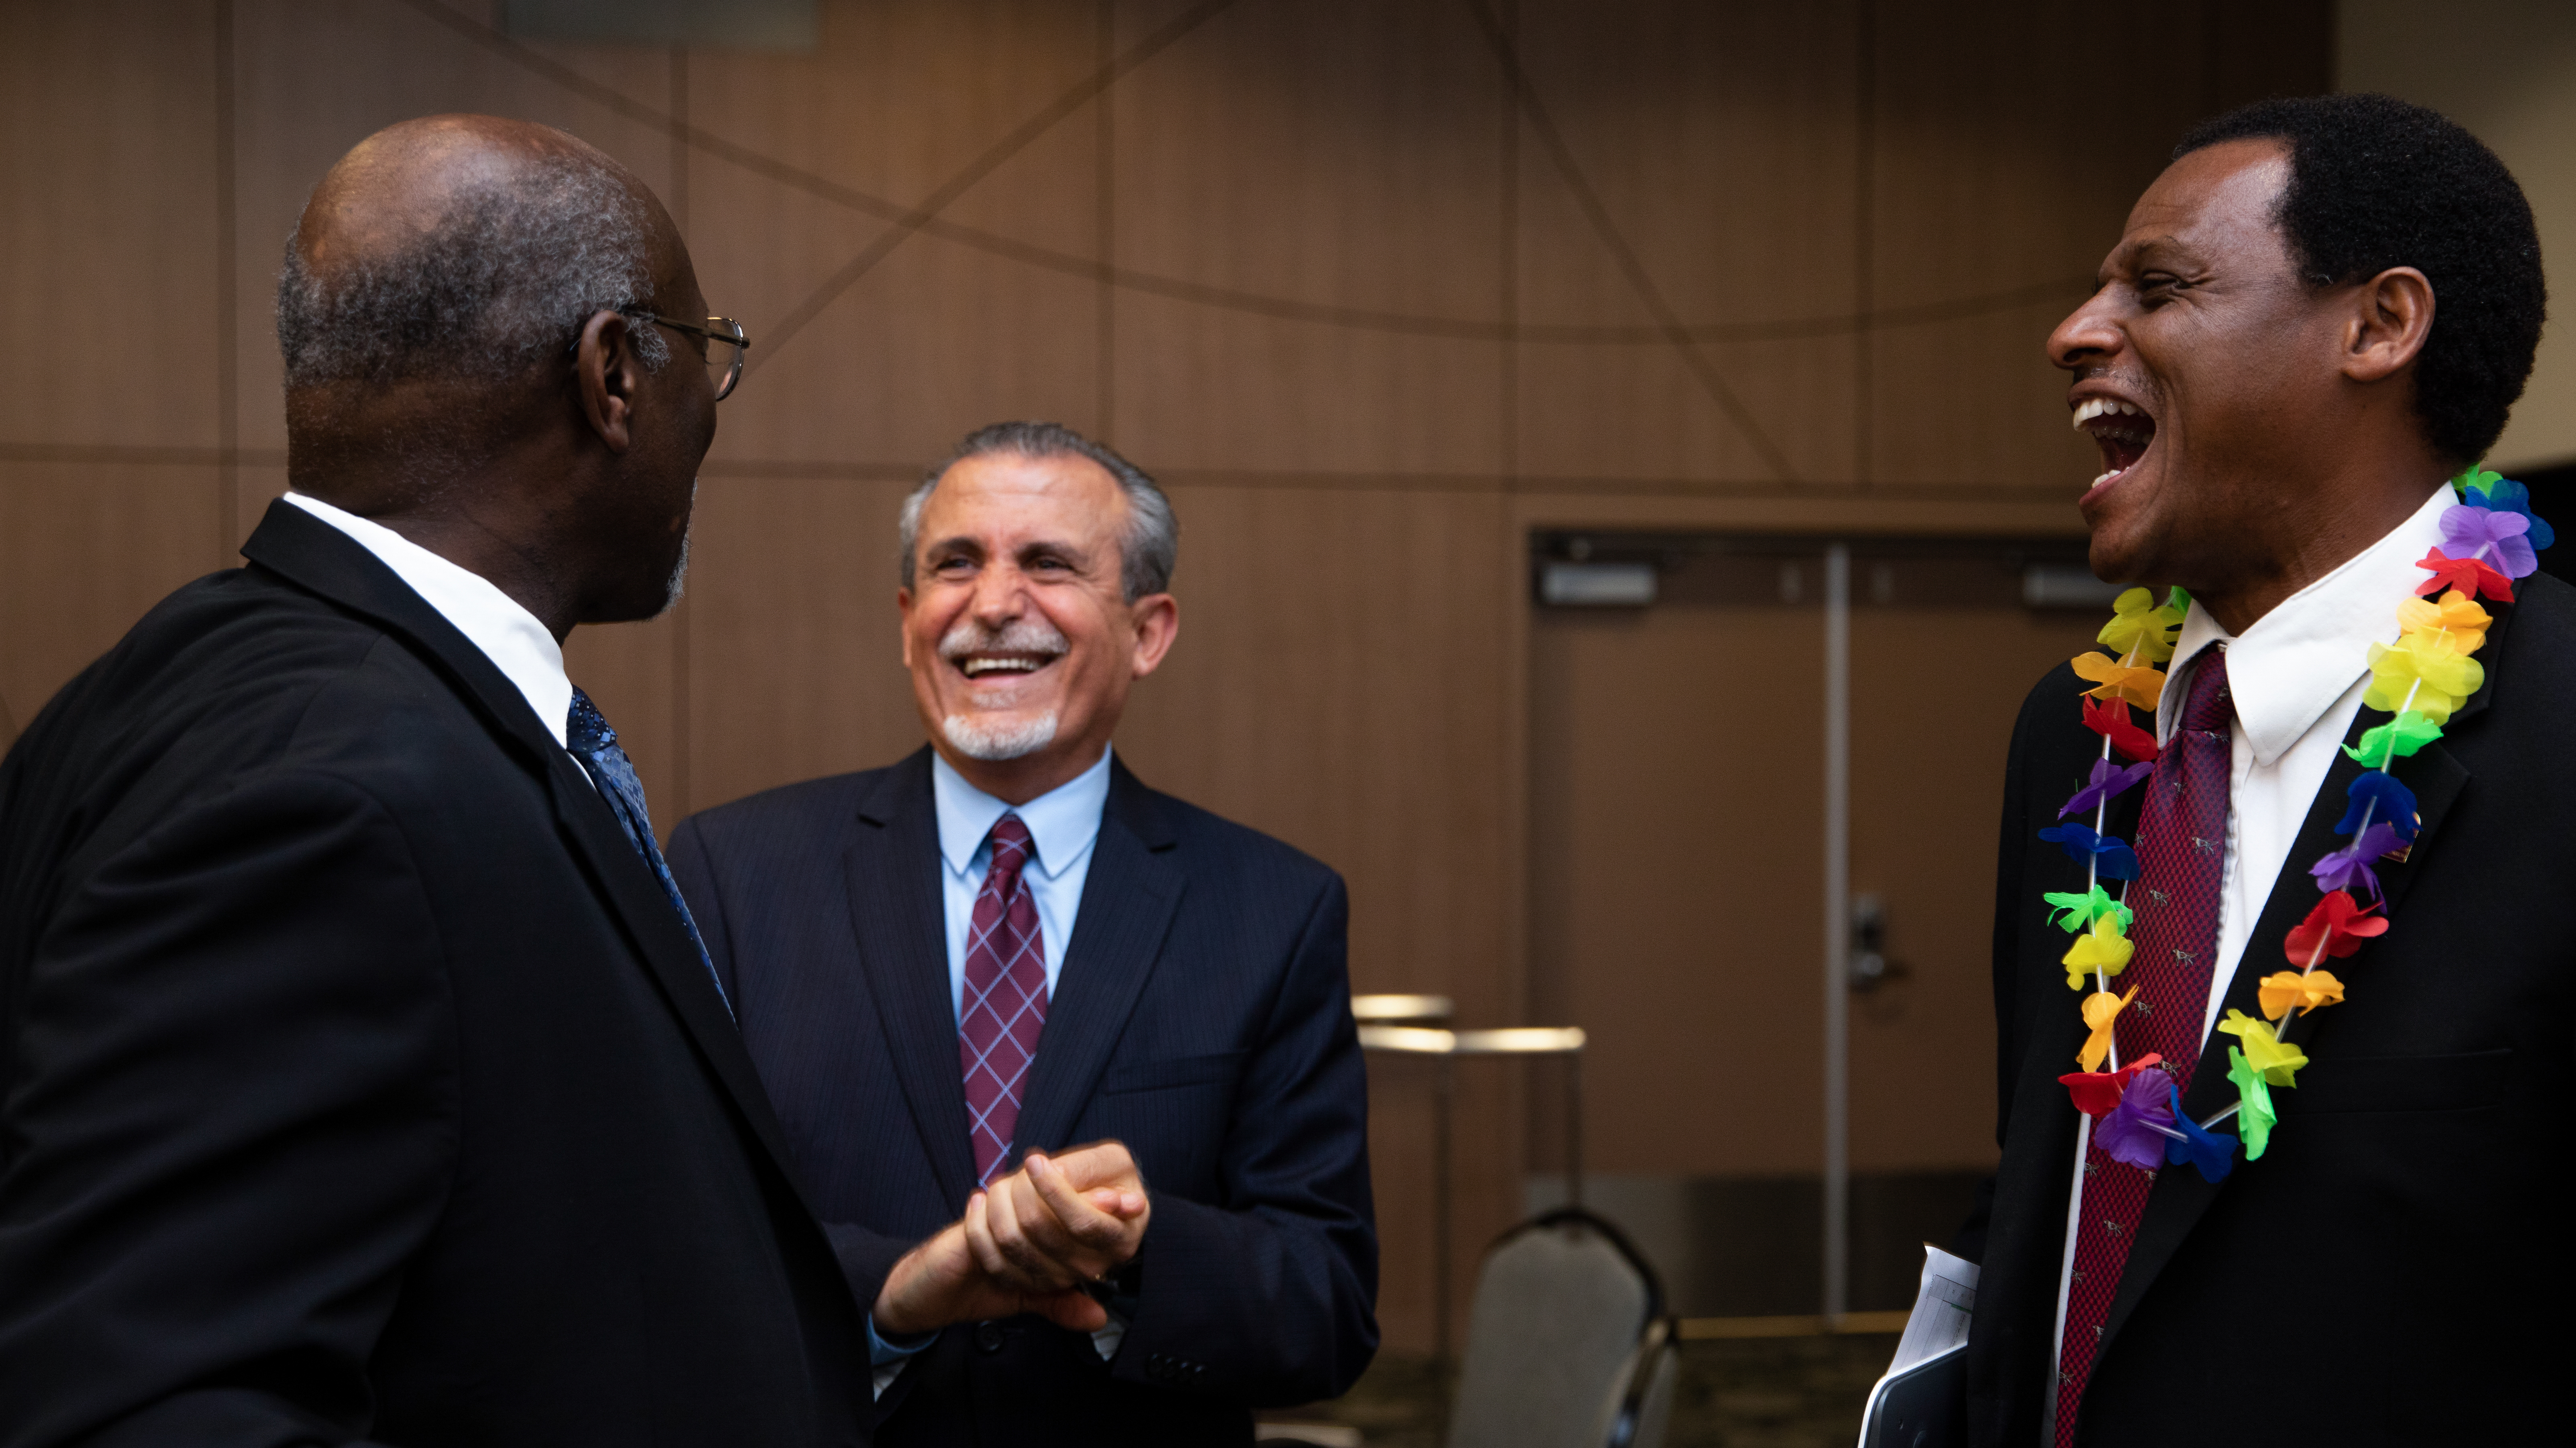 Preidenet Willie J. Hagan has a laugh with Kamal Hamden, an Annenberg endowed professor and director of the Center for Innovation in STEM Education; and John Davis, dean of the College of Education.